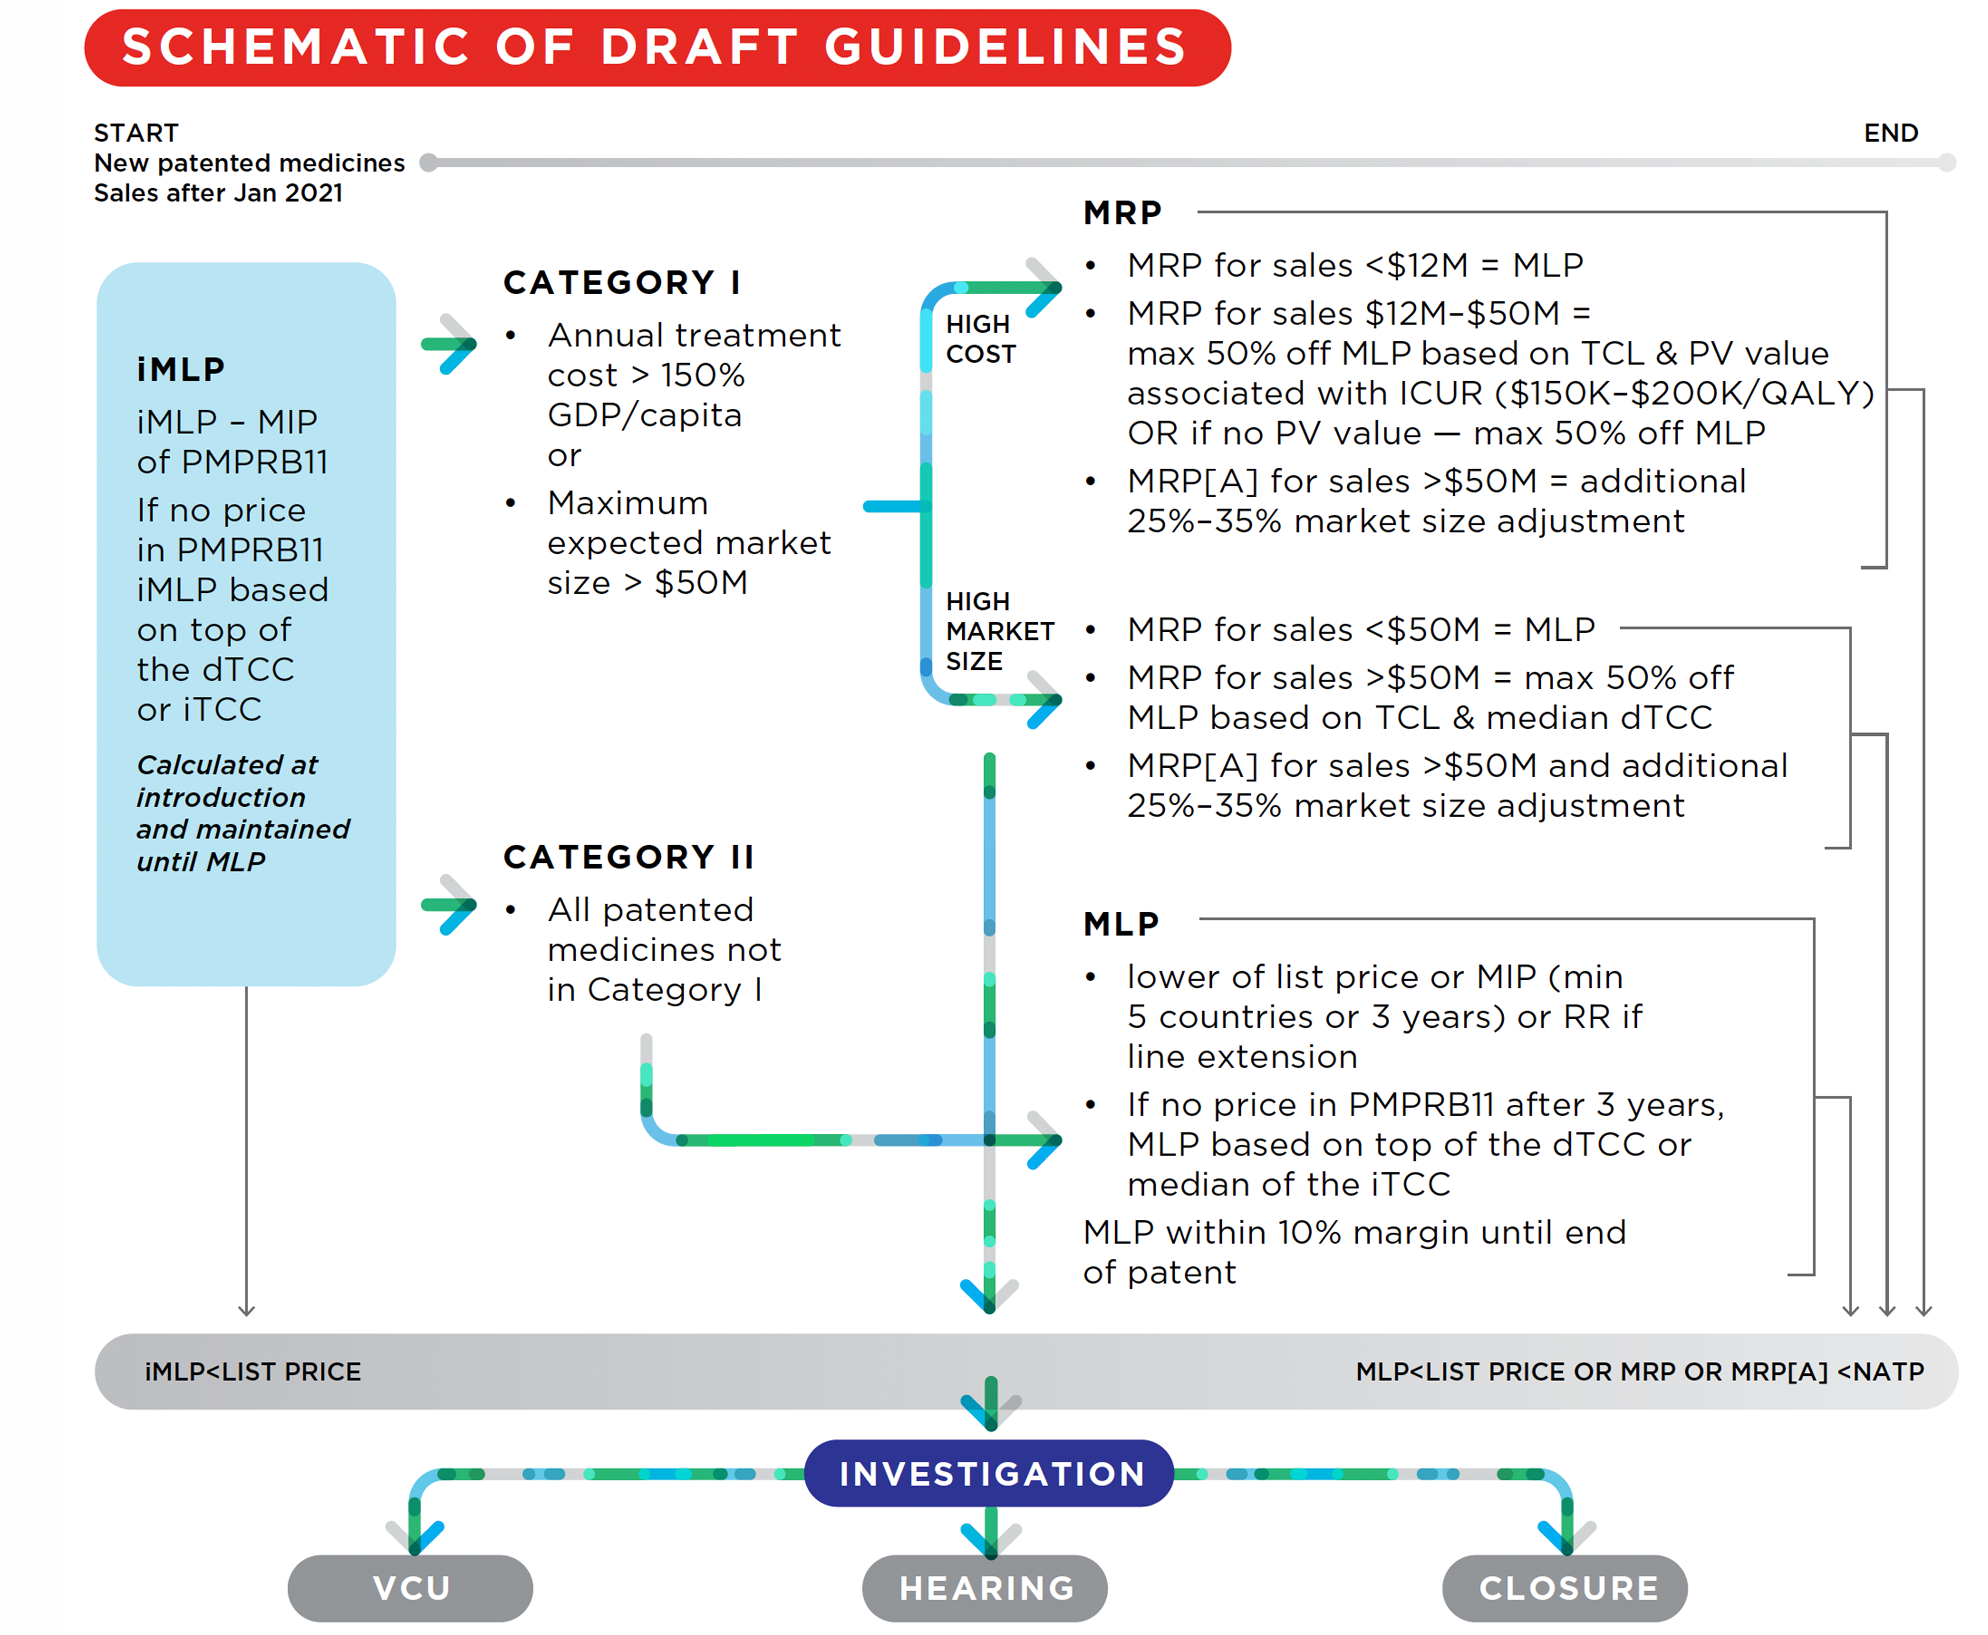 Schematic of Draft Guidelines